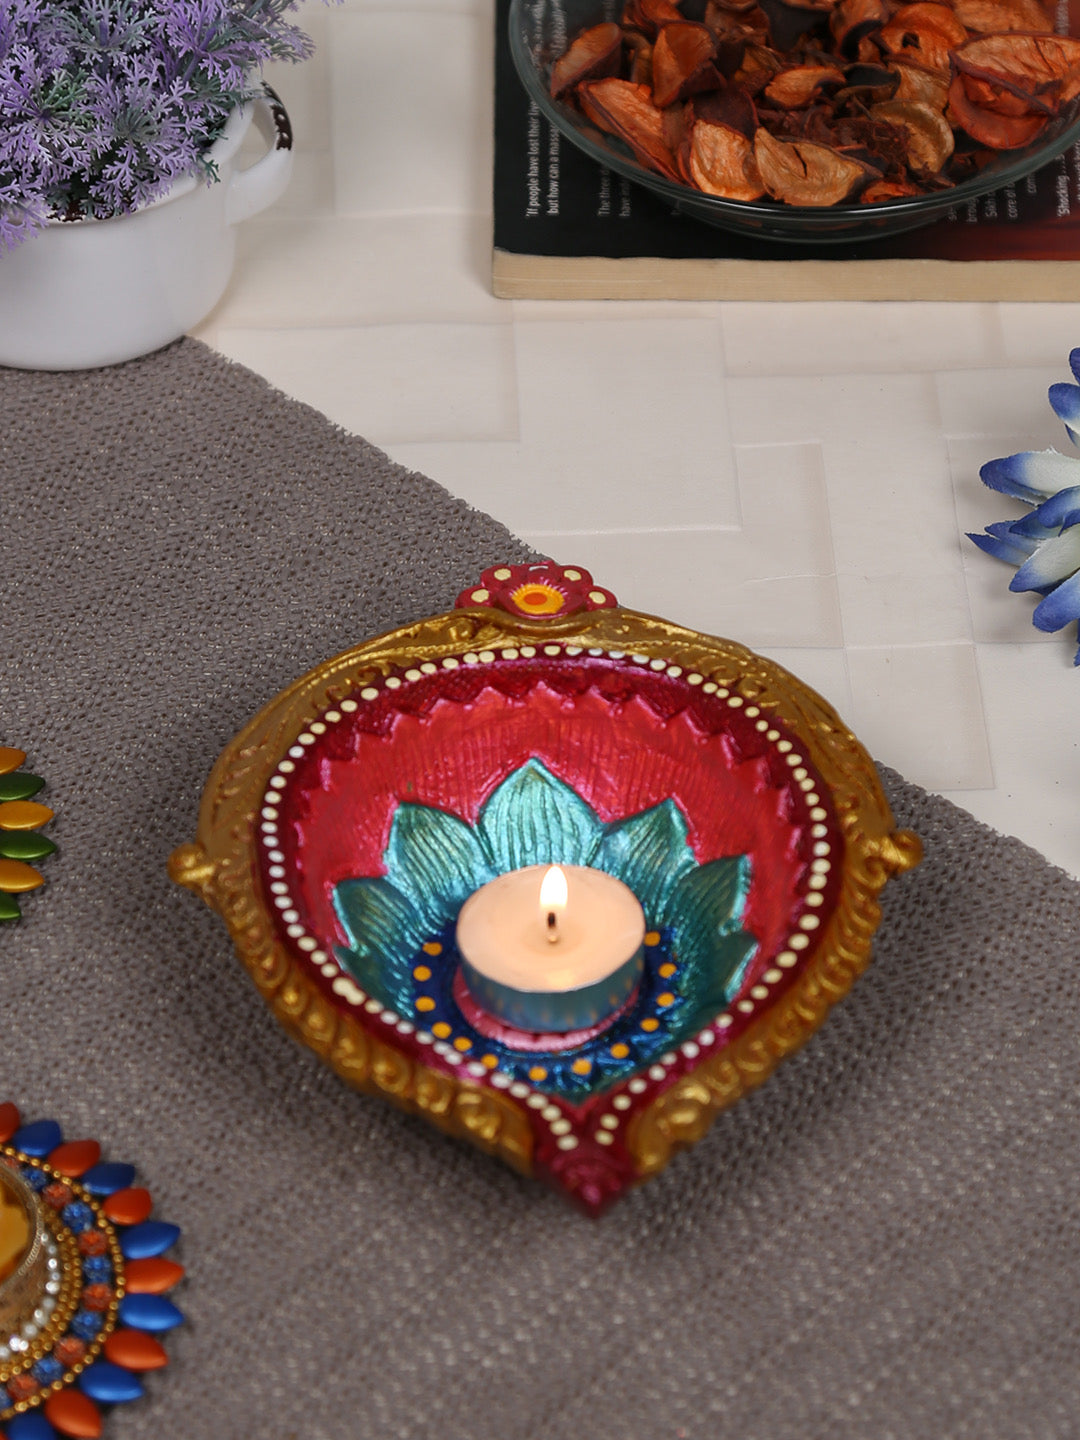 Aapno Rajasthan Multicolor Terracotta Handcrafted Diya for Diwali in Traditional design - 1 pc - Default Title (DD1821)